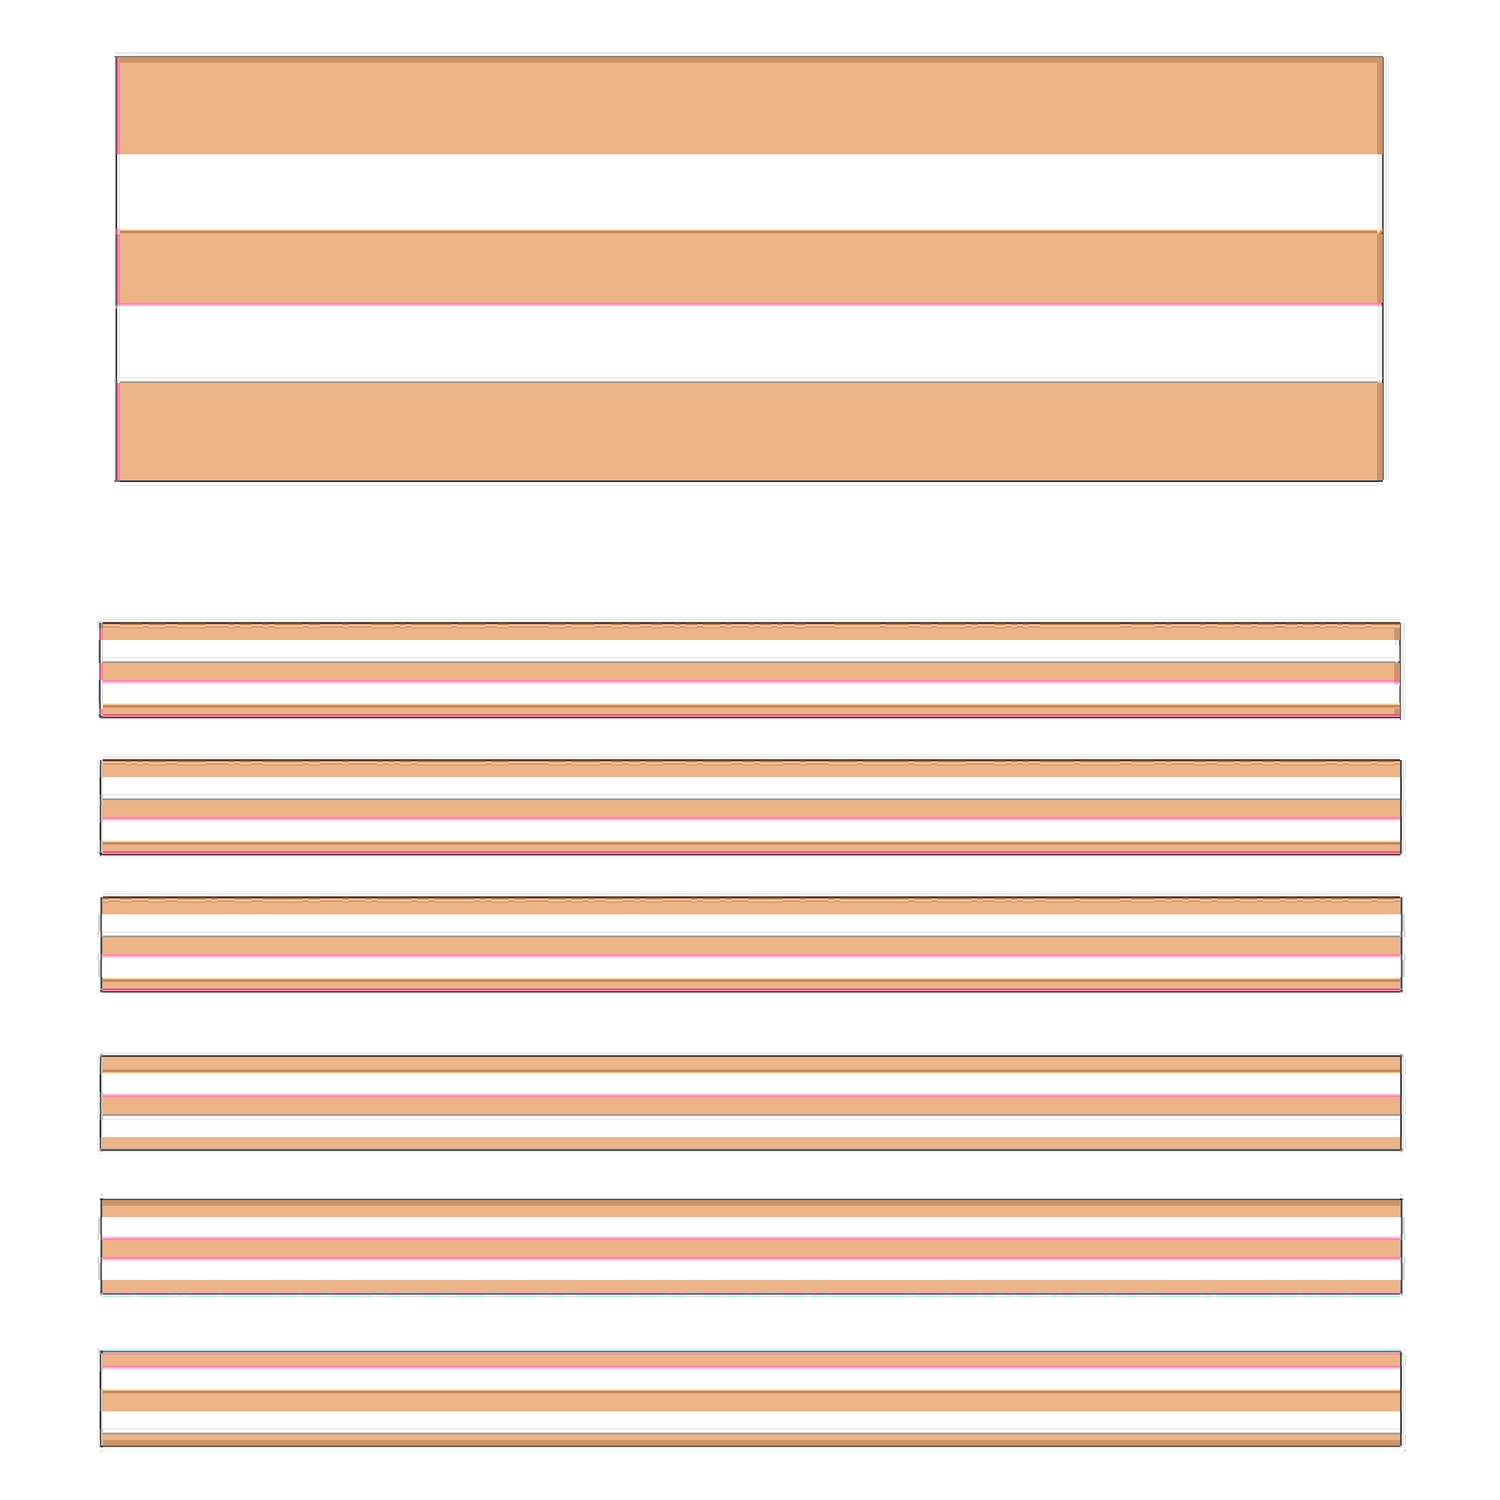 Simply Stylish Coral & White Stripes Straight Borders, 36 Feet Per Pack, 6 Packs